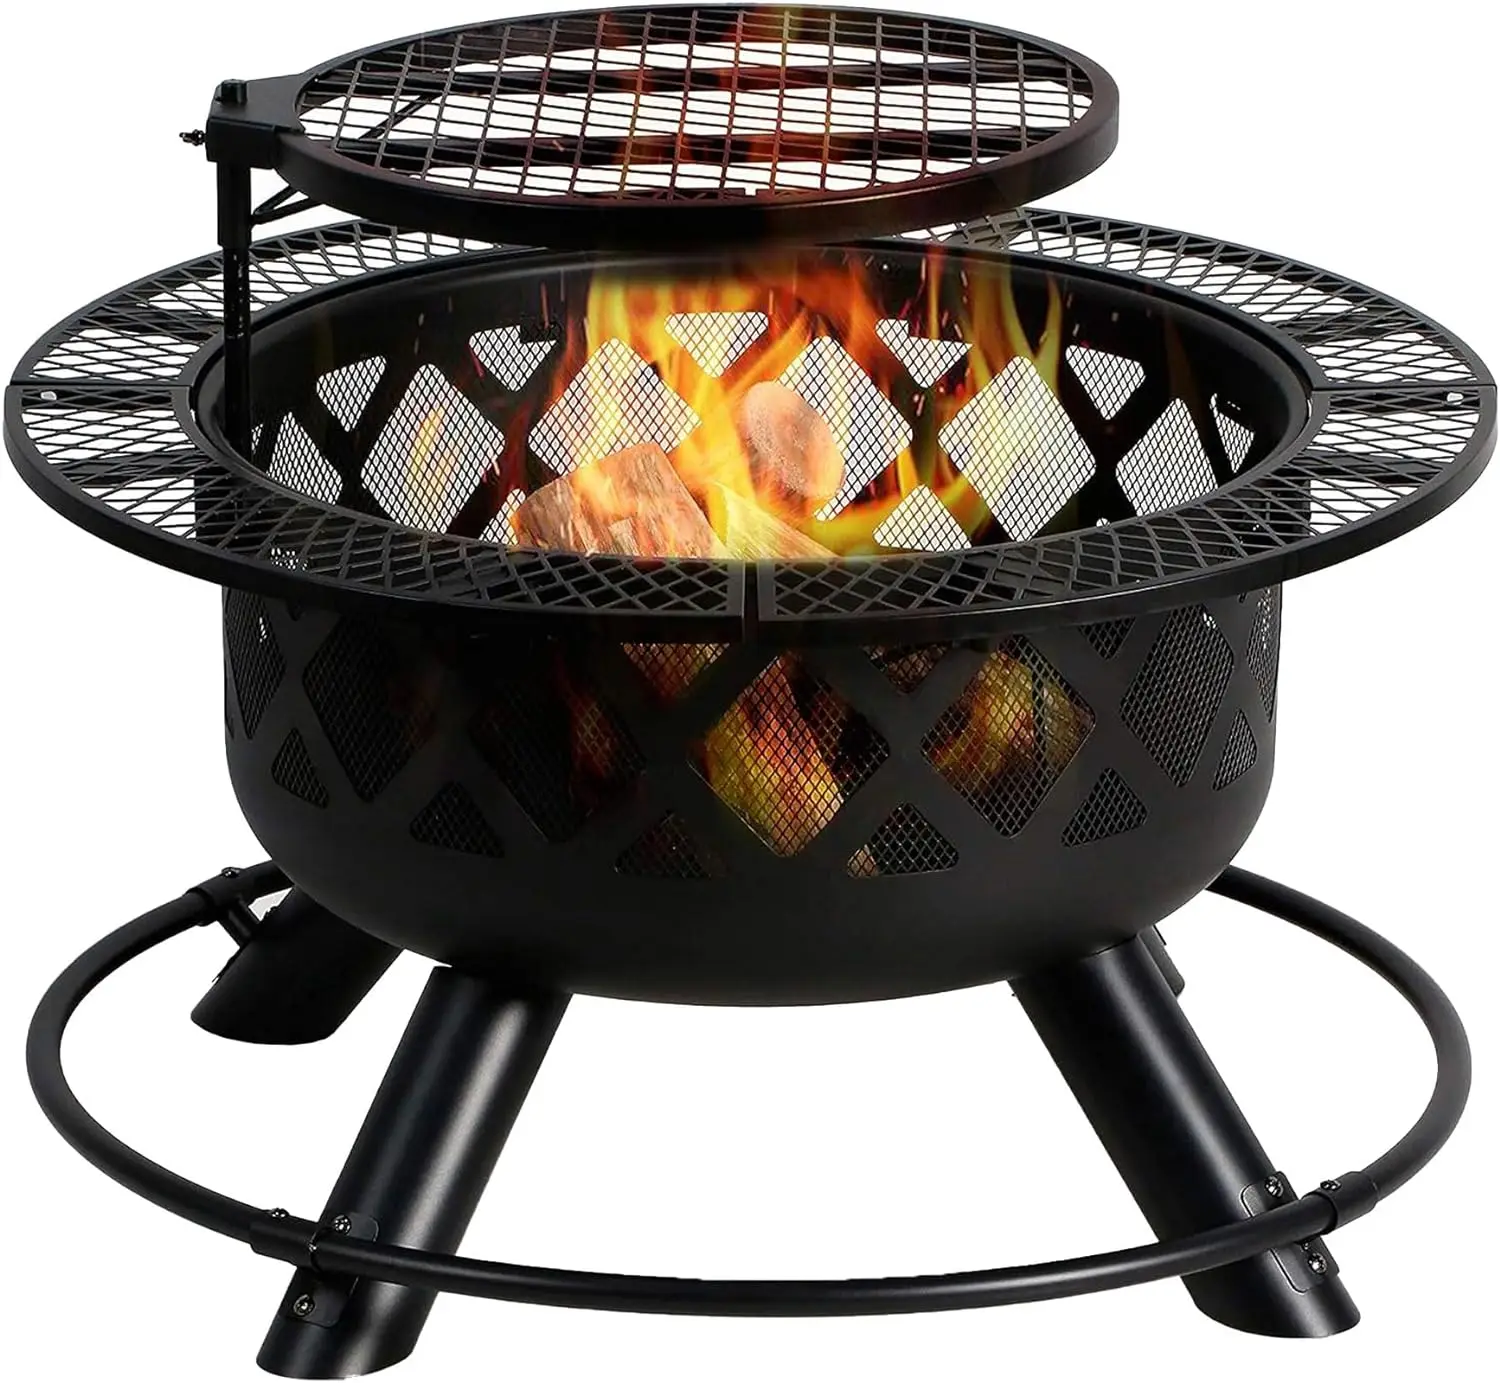 

Four Seasons Courtyard 24" Steel Wood Burning Fire Pit Patio Fireplace with Removable 360 Degree Swivel Cooking Grill